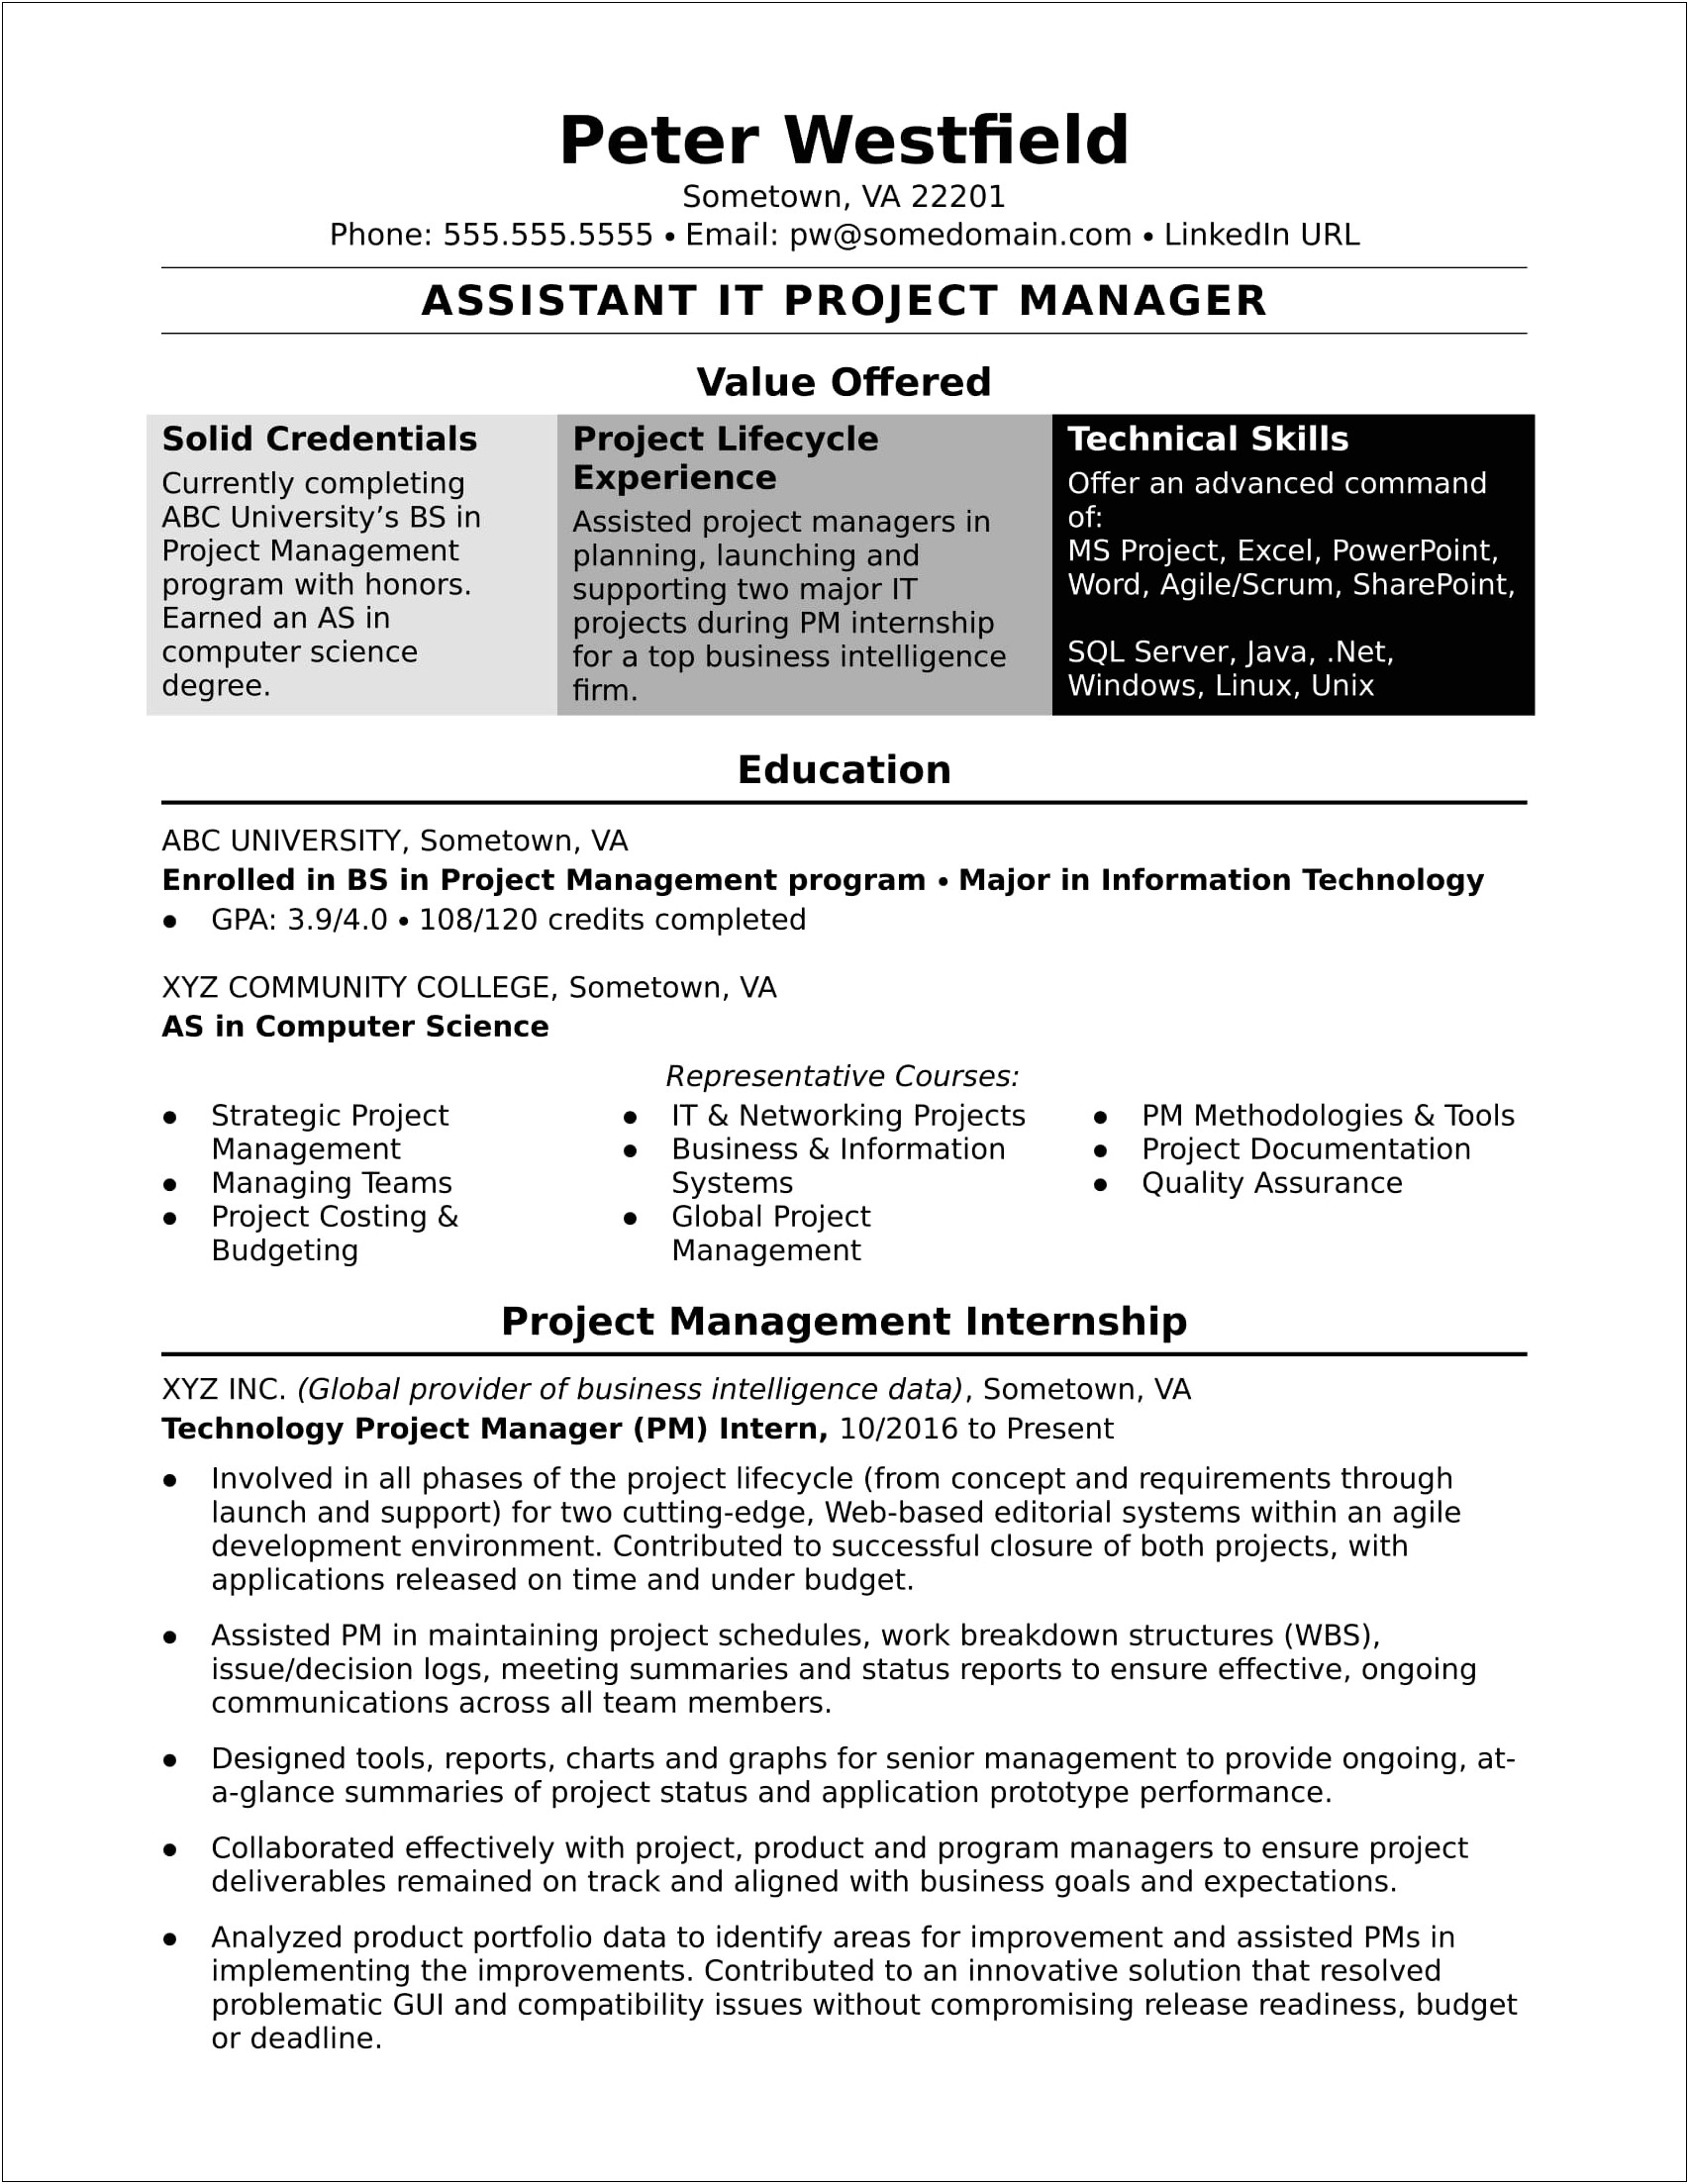 Resume Format For Project Manager In Construction